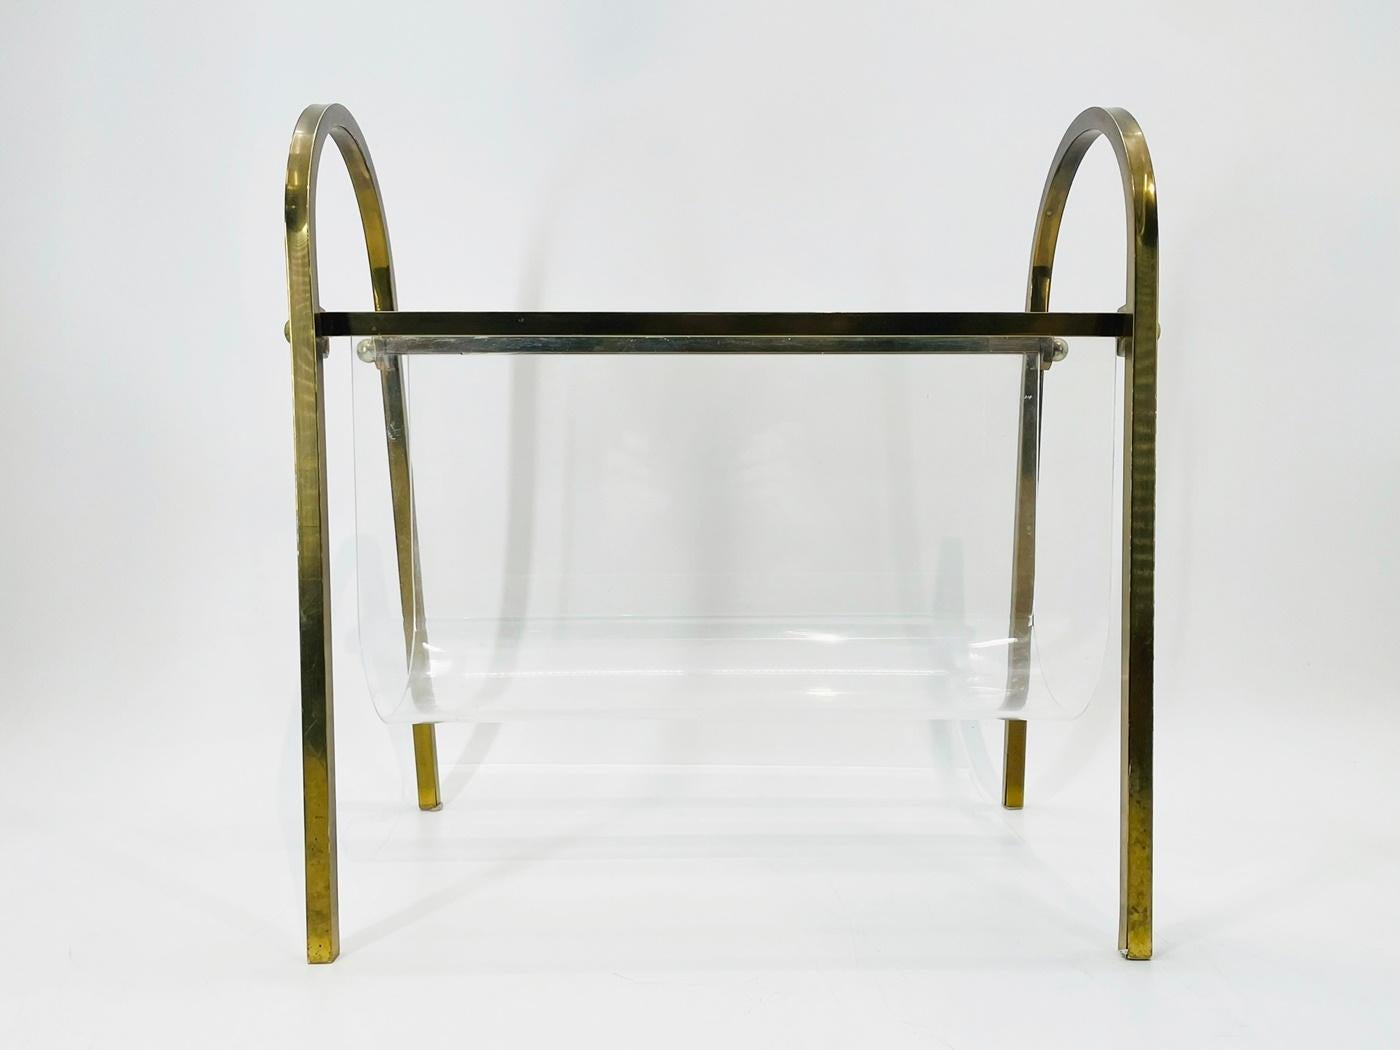 Add a touch of sophistication to your living space with this exquisite Brass & Lucite Magazine Holder by renowned designer Charles Hollis Jones. Crafted in the USA during the 1960s, this stunning piece features a sleek gold metal stand with